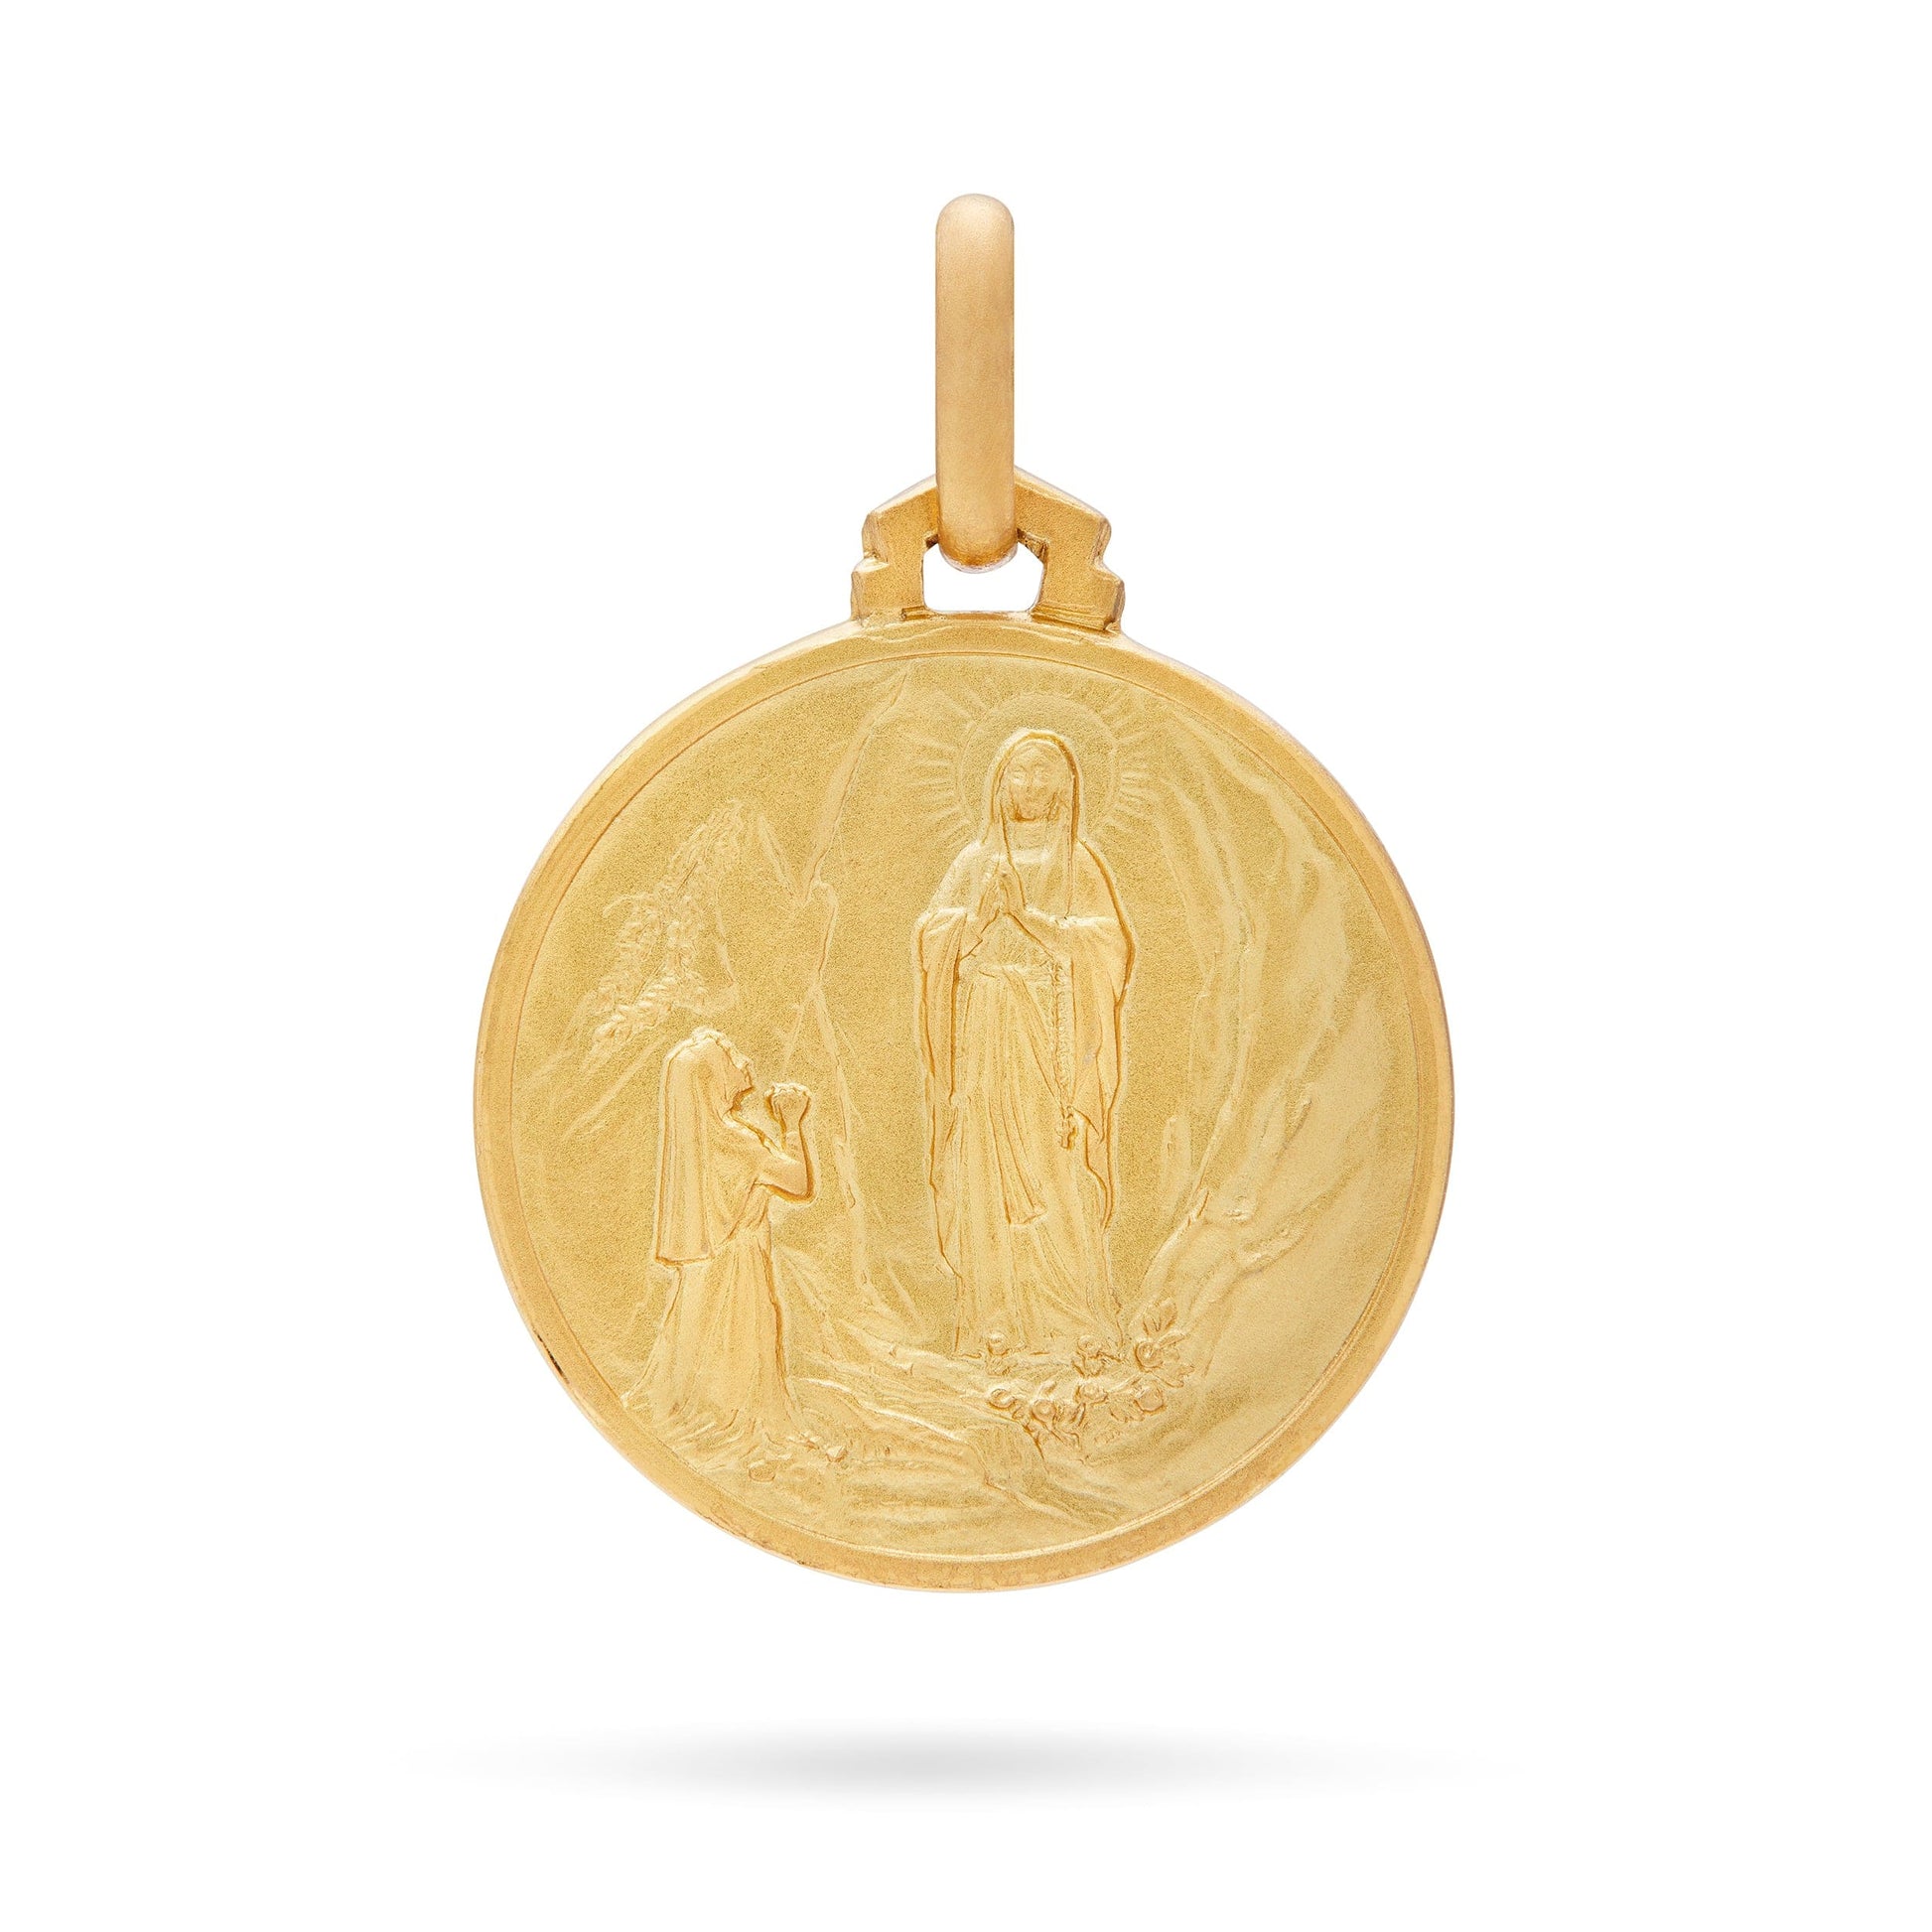 MONDO CATTOLICO 18 mm Our Lady of Lourdes Gold Medal